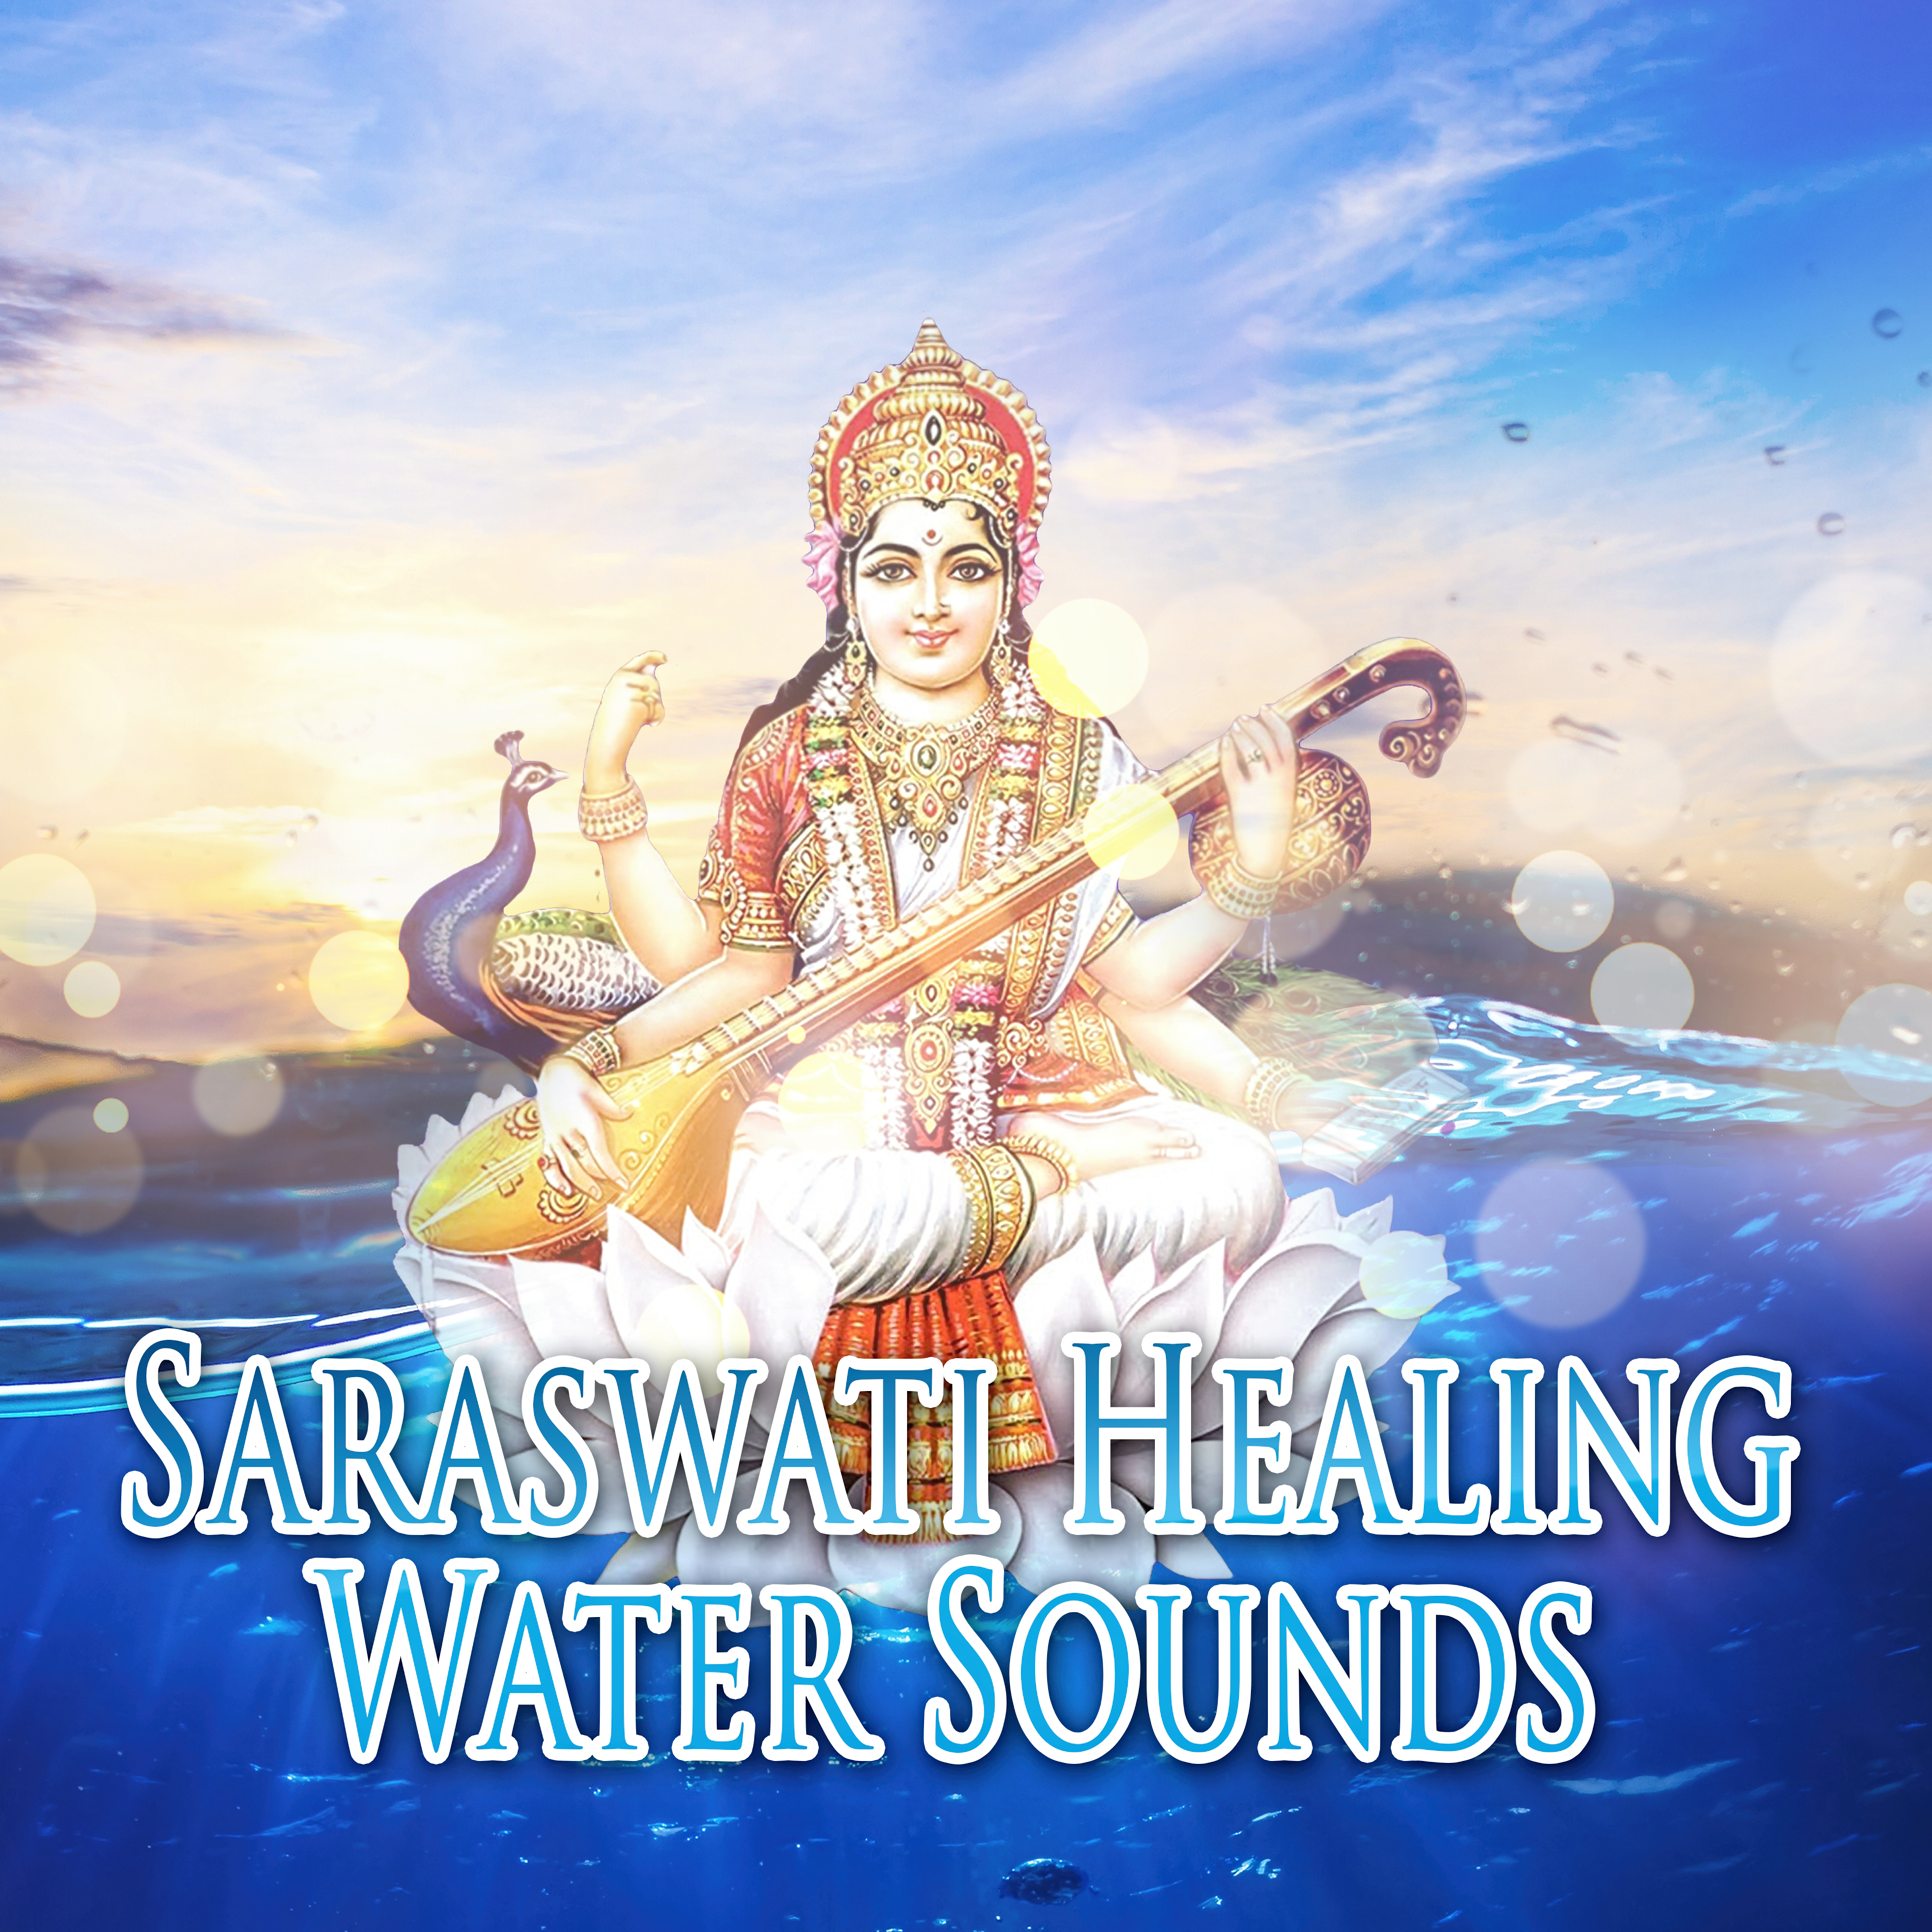 Saraswati: Healing Water Sounds – New Age Music for Relaxation & Meditation, Creativity, Inner Peace, Insight, Self Knowledge, Stress Relief, Divine Wisdom, Water Music Therapy